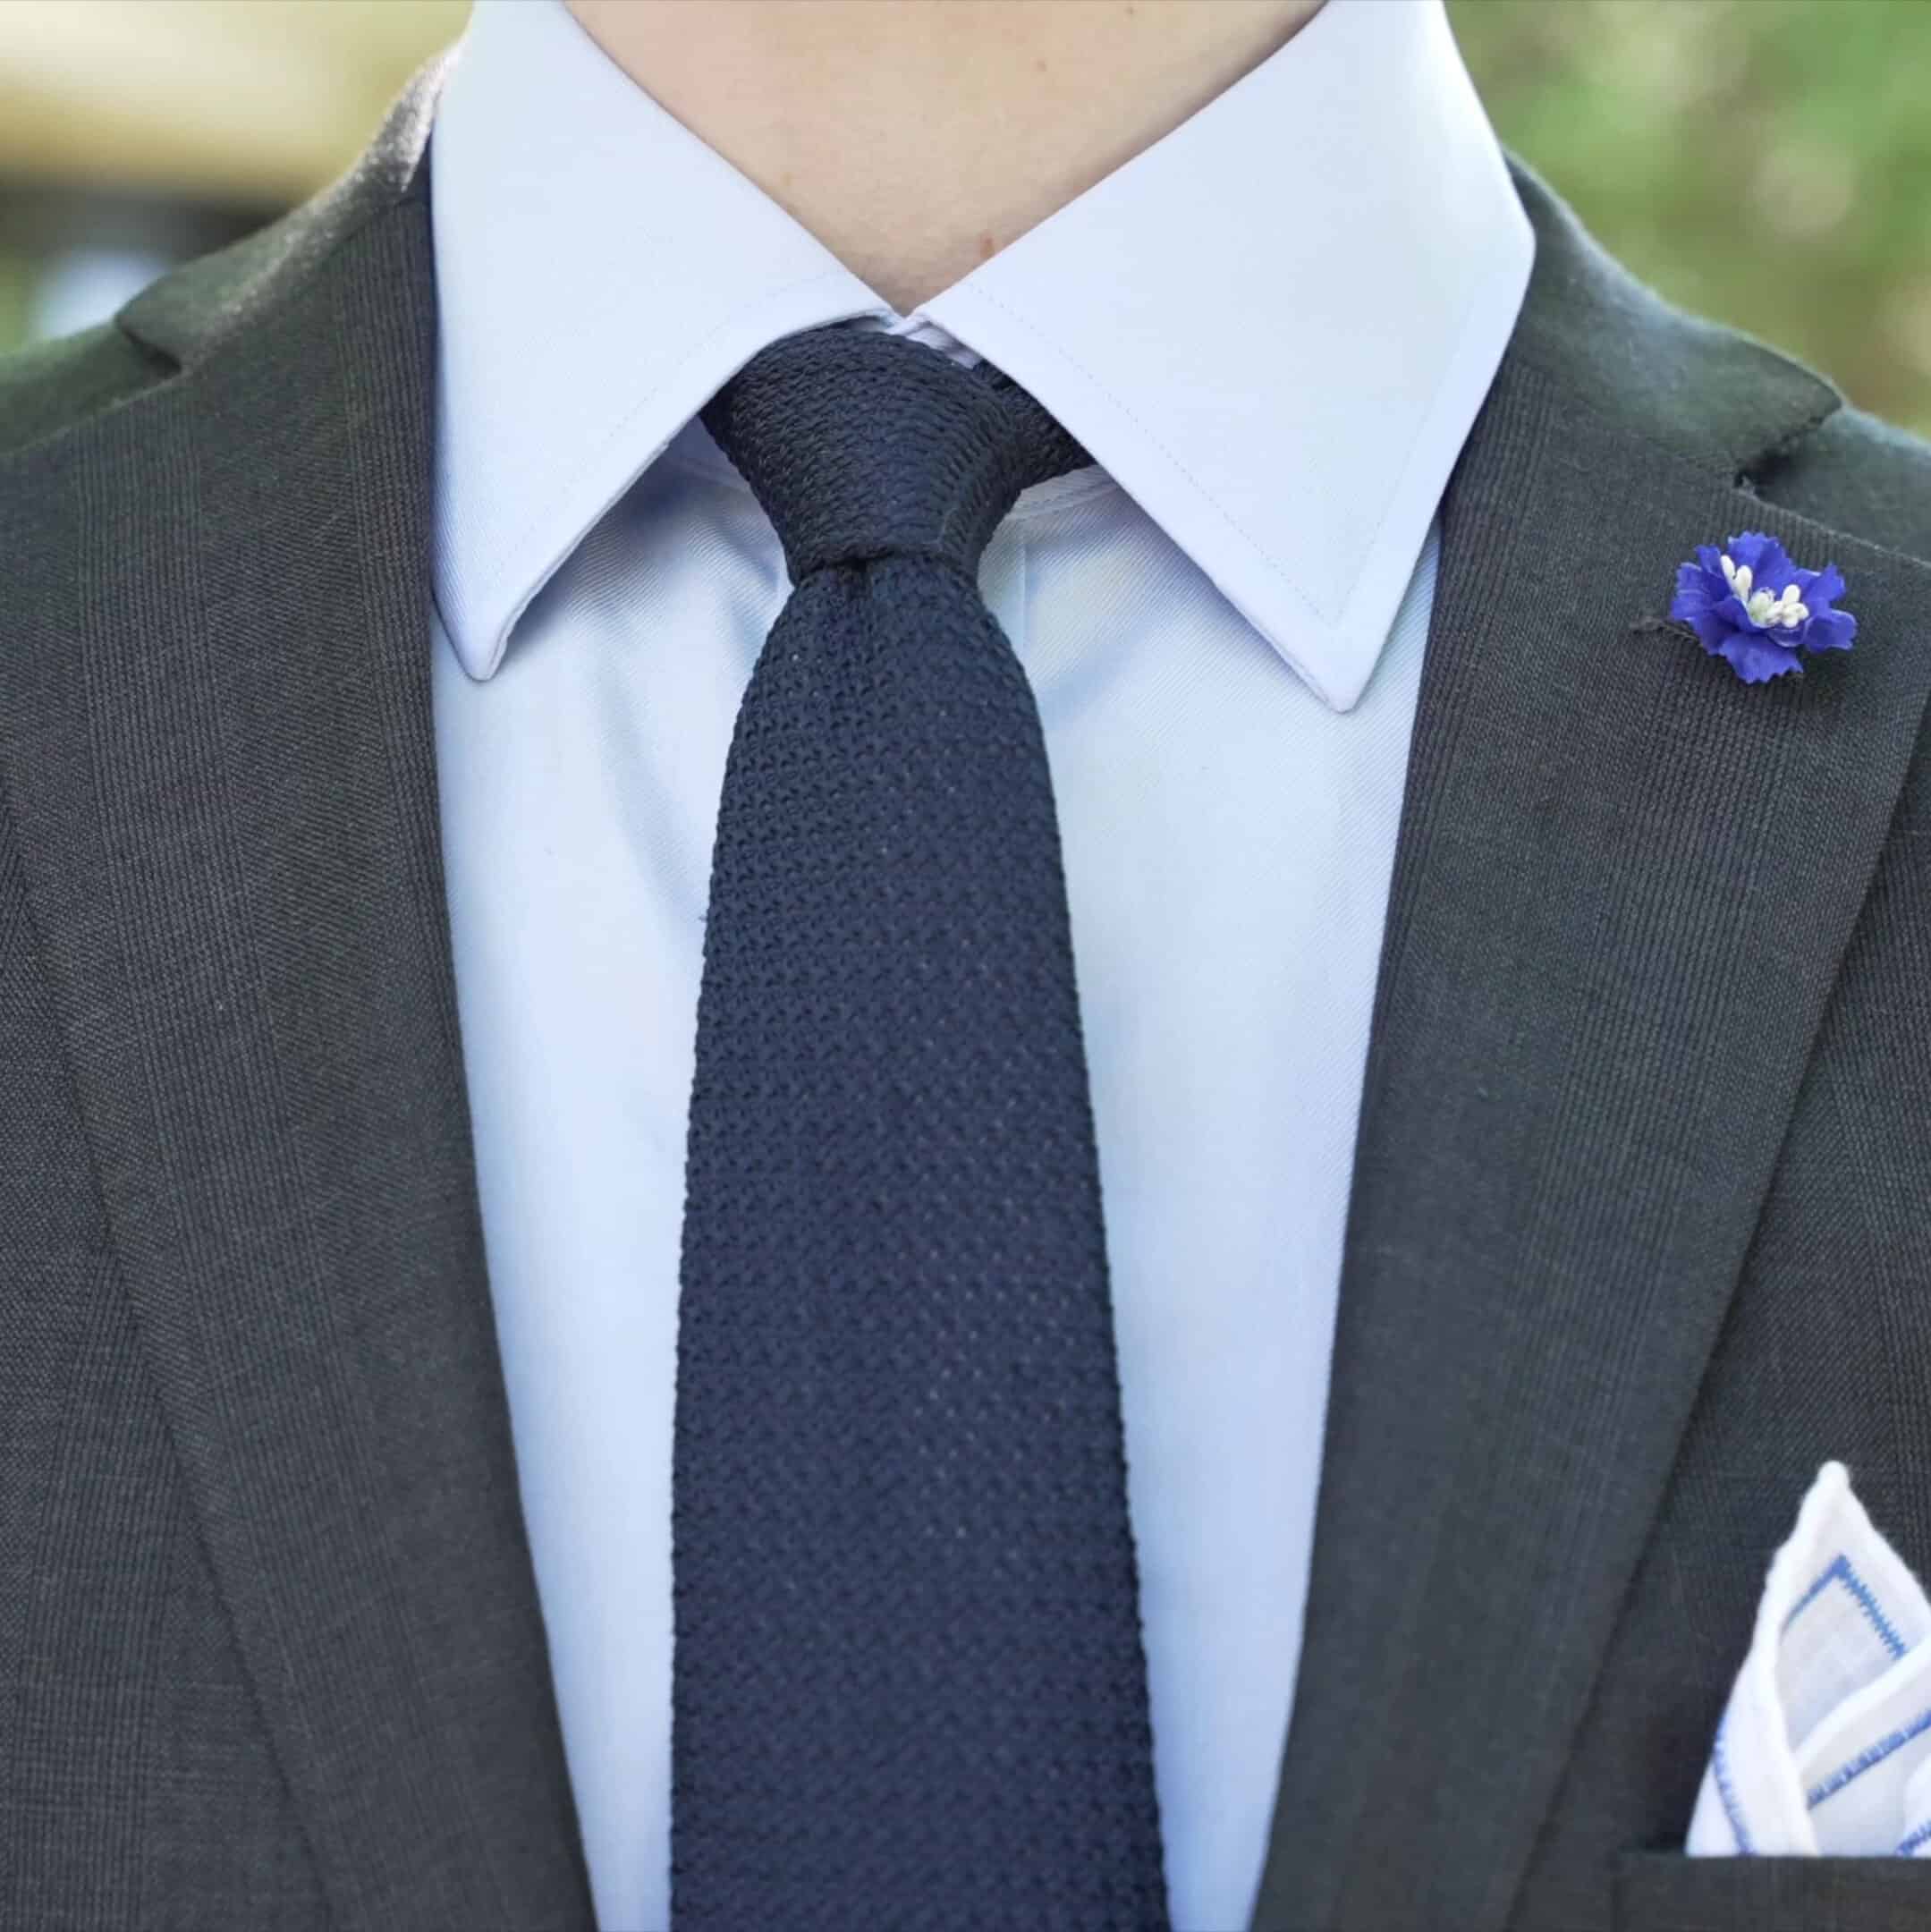 A navy blue grenadine tie can be used for attending funerals.